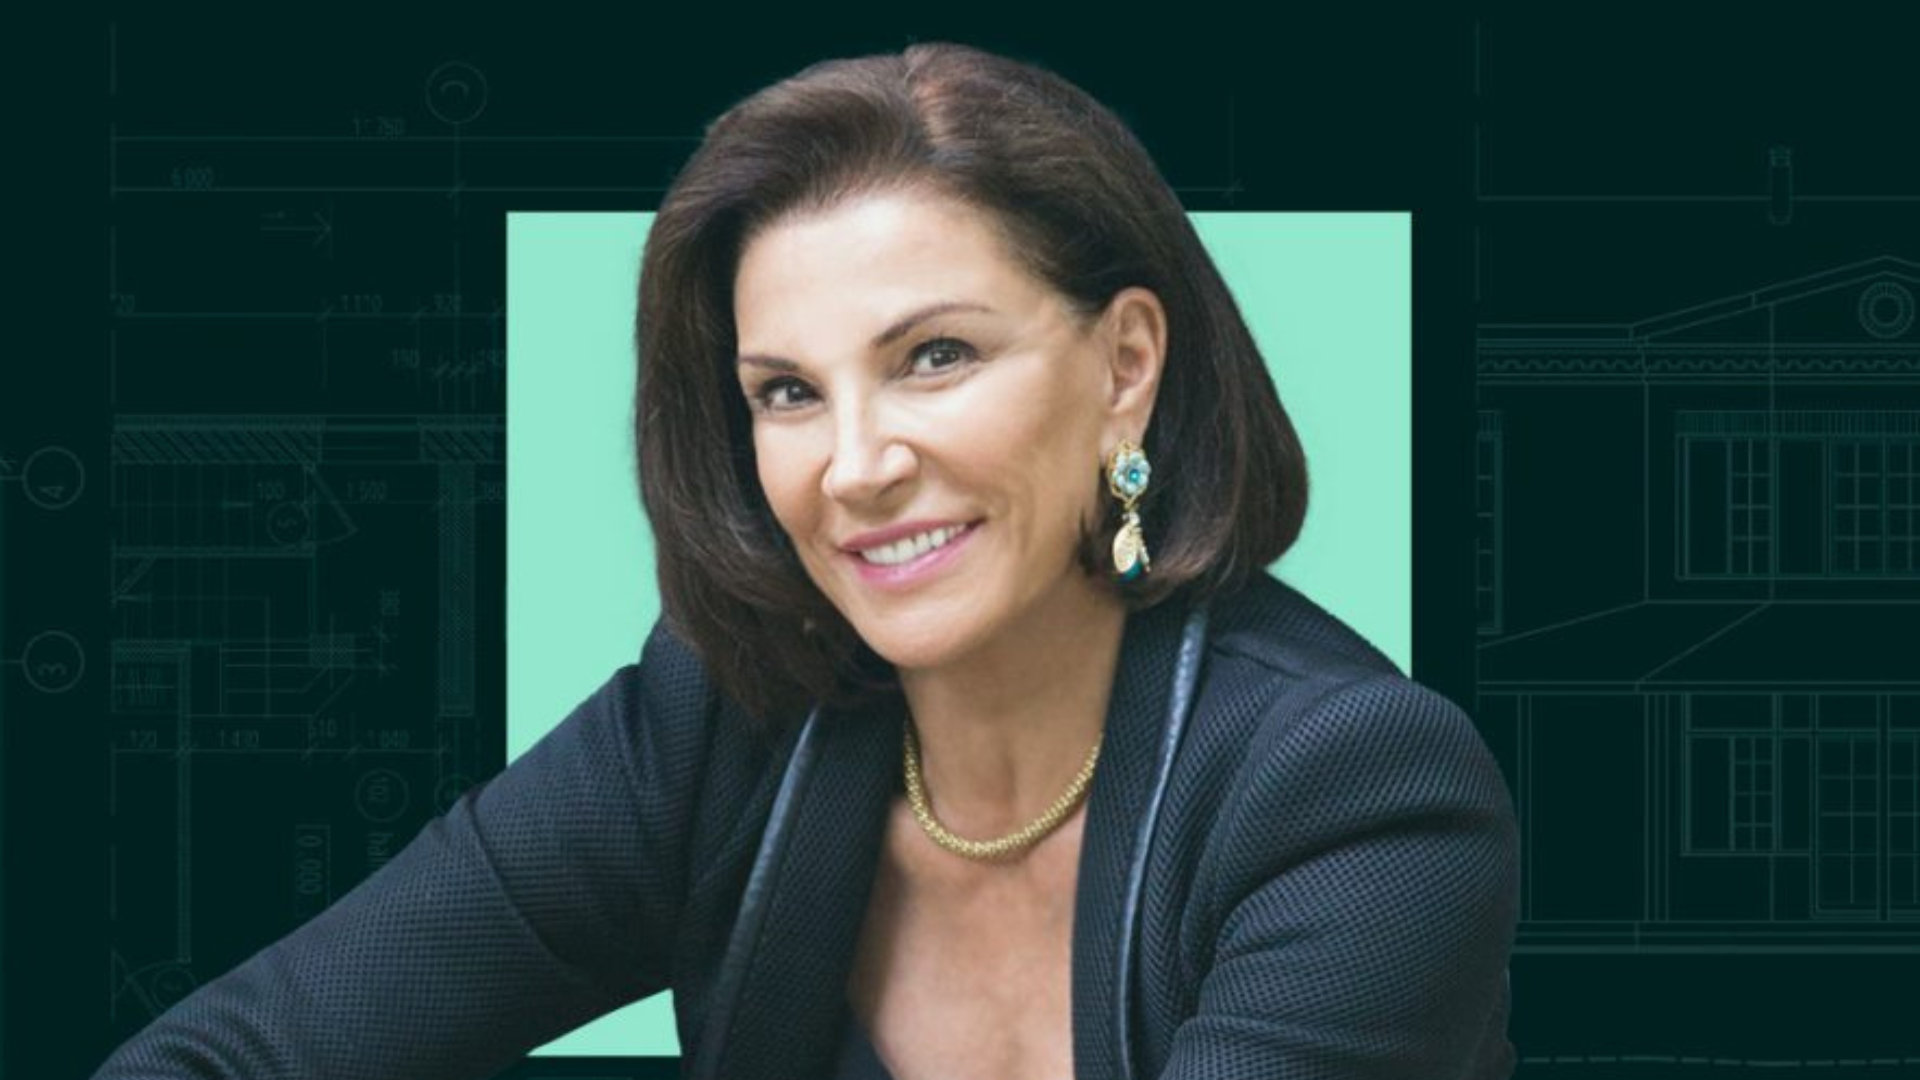 Hilary Farr Boobs - Her Secret Battle With Breast Cancer